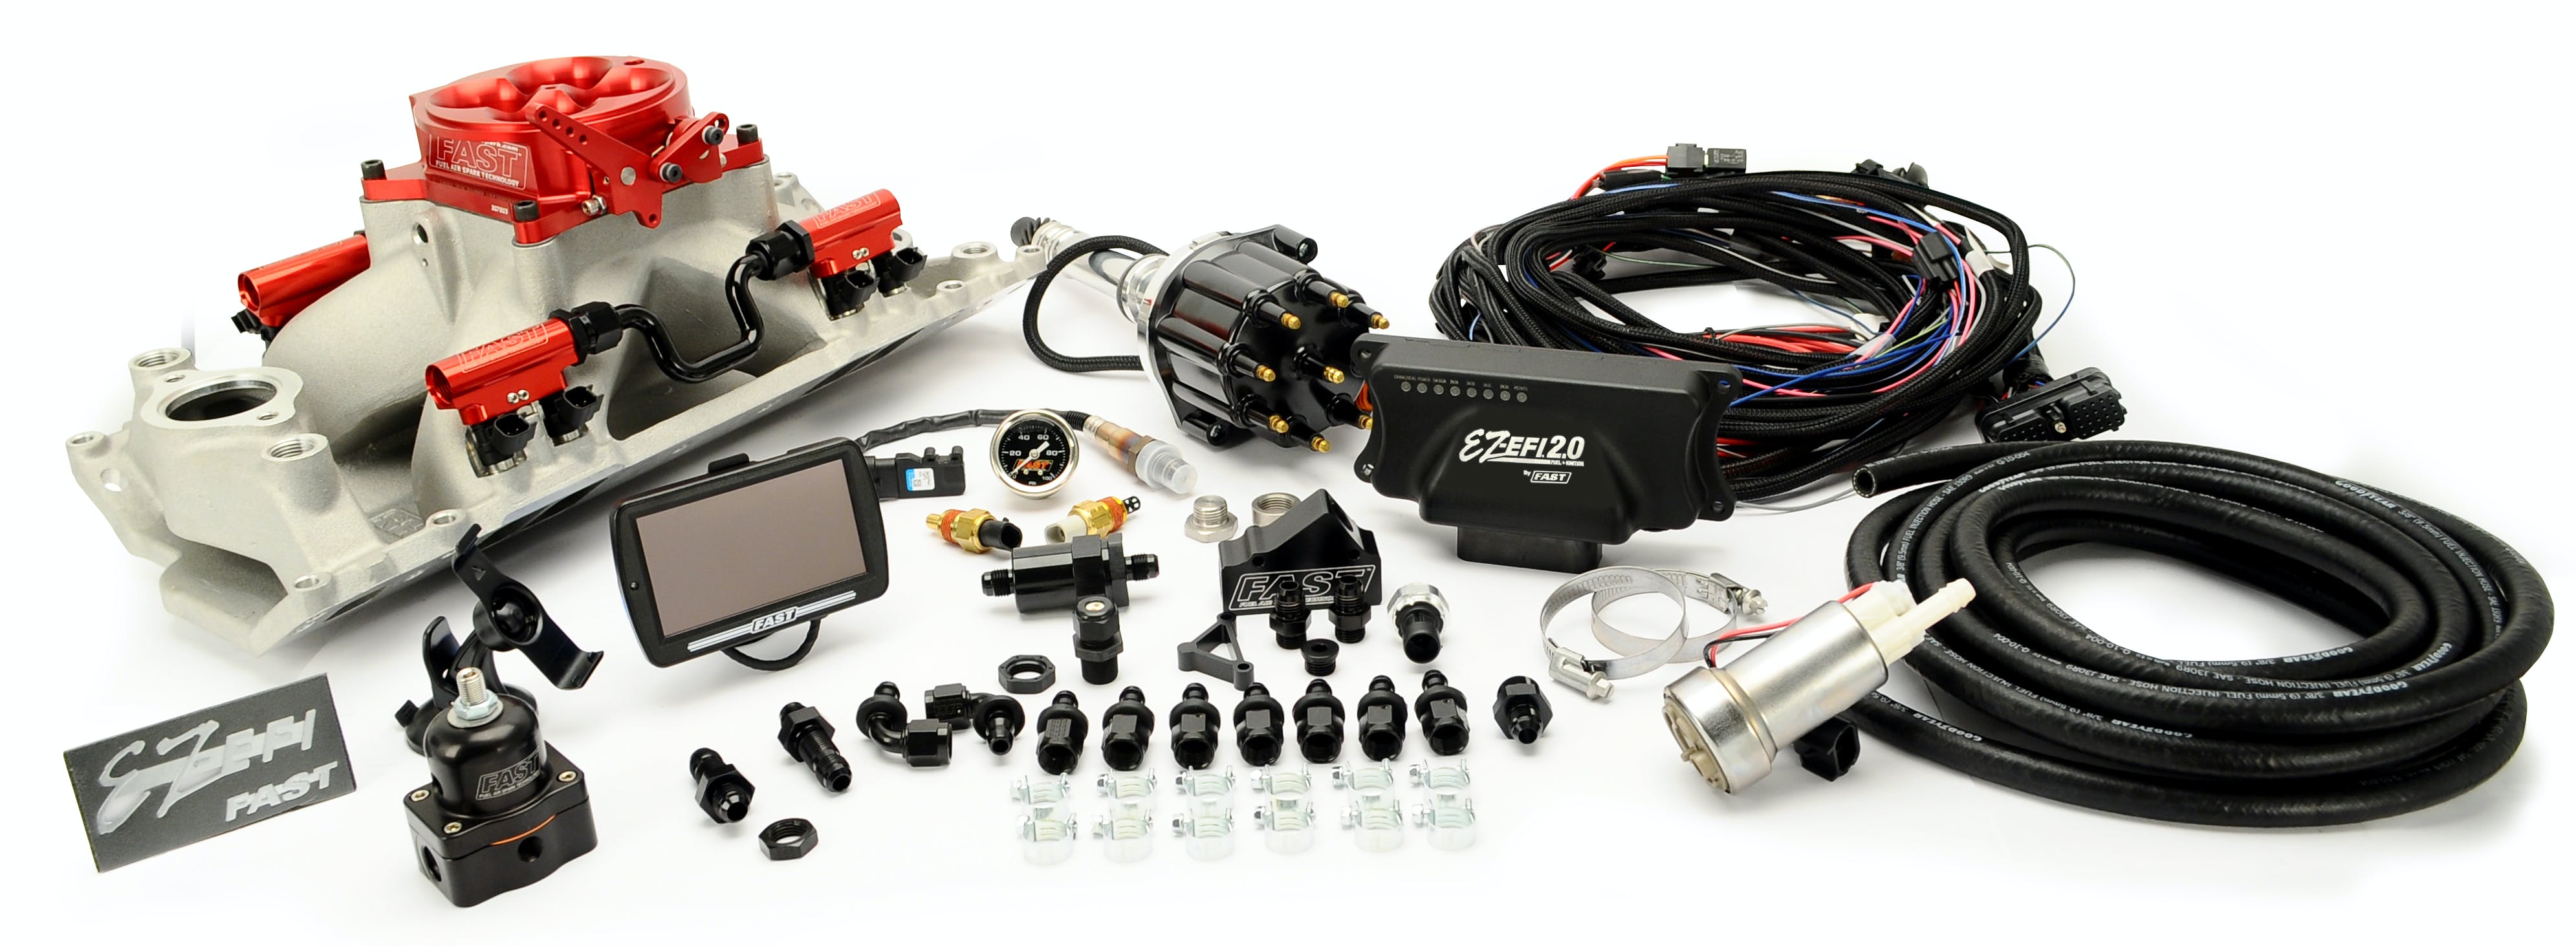 FAST - Fuel Air Spark Technology 30411T-10T EZ 2.0 BBC Multiport kit w/intake, rails, t-body, distributor and fuel pump